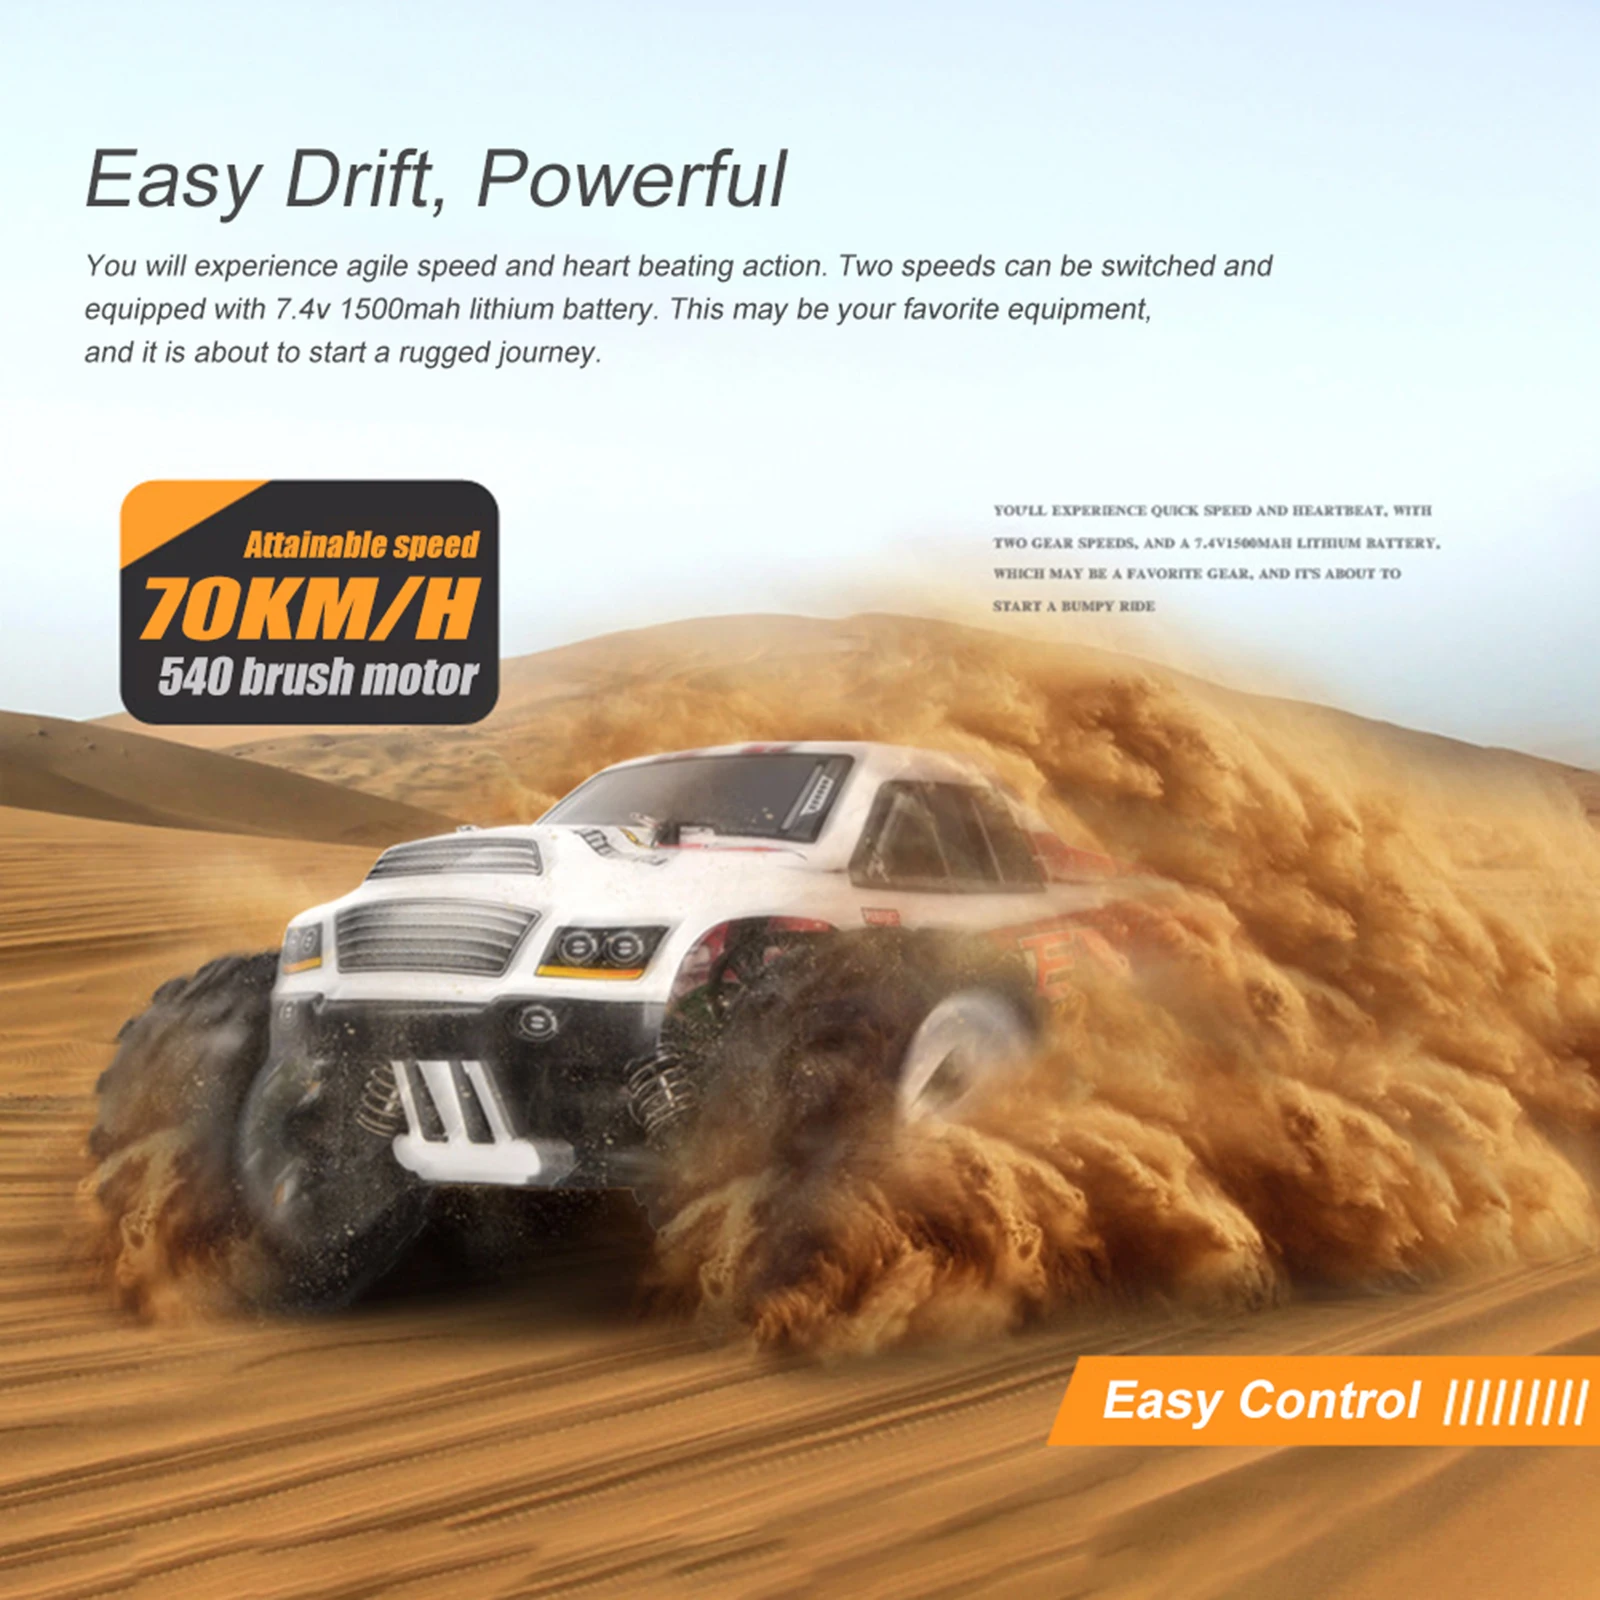 

WLtoys A979-B 2.4GHz 1/18 RC Crawler Car 4WD 70km/h High Speed Electric Full Scale Remote Control Monster Truck RTR